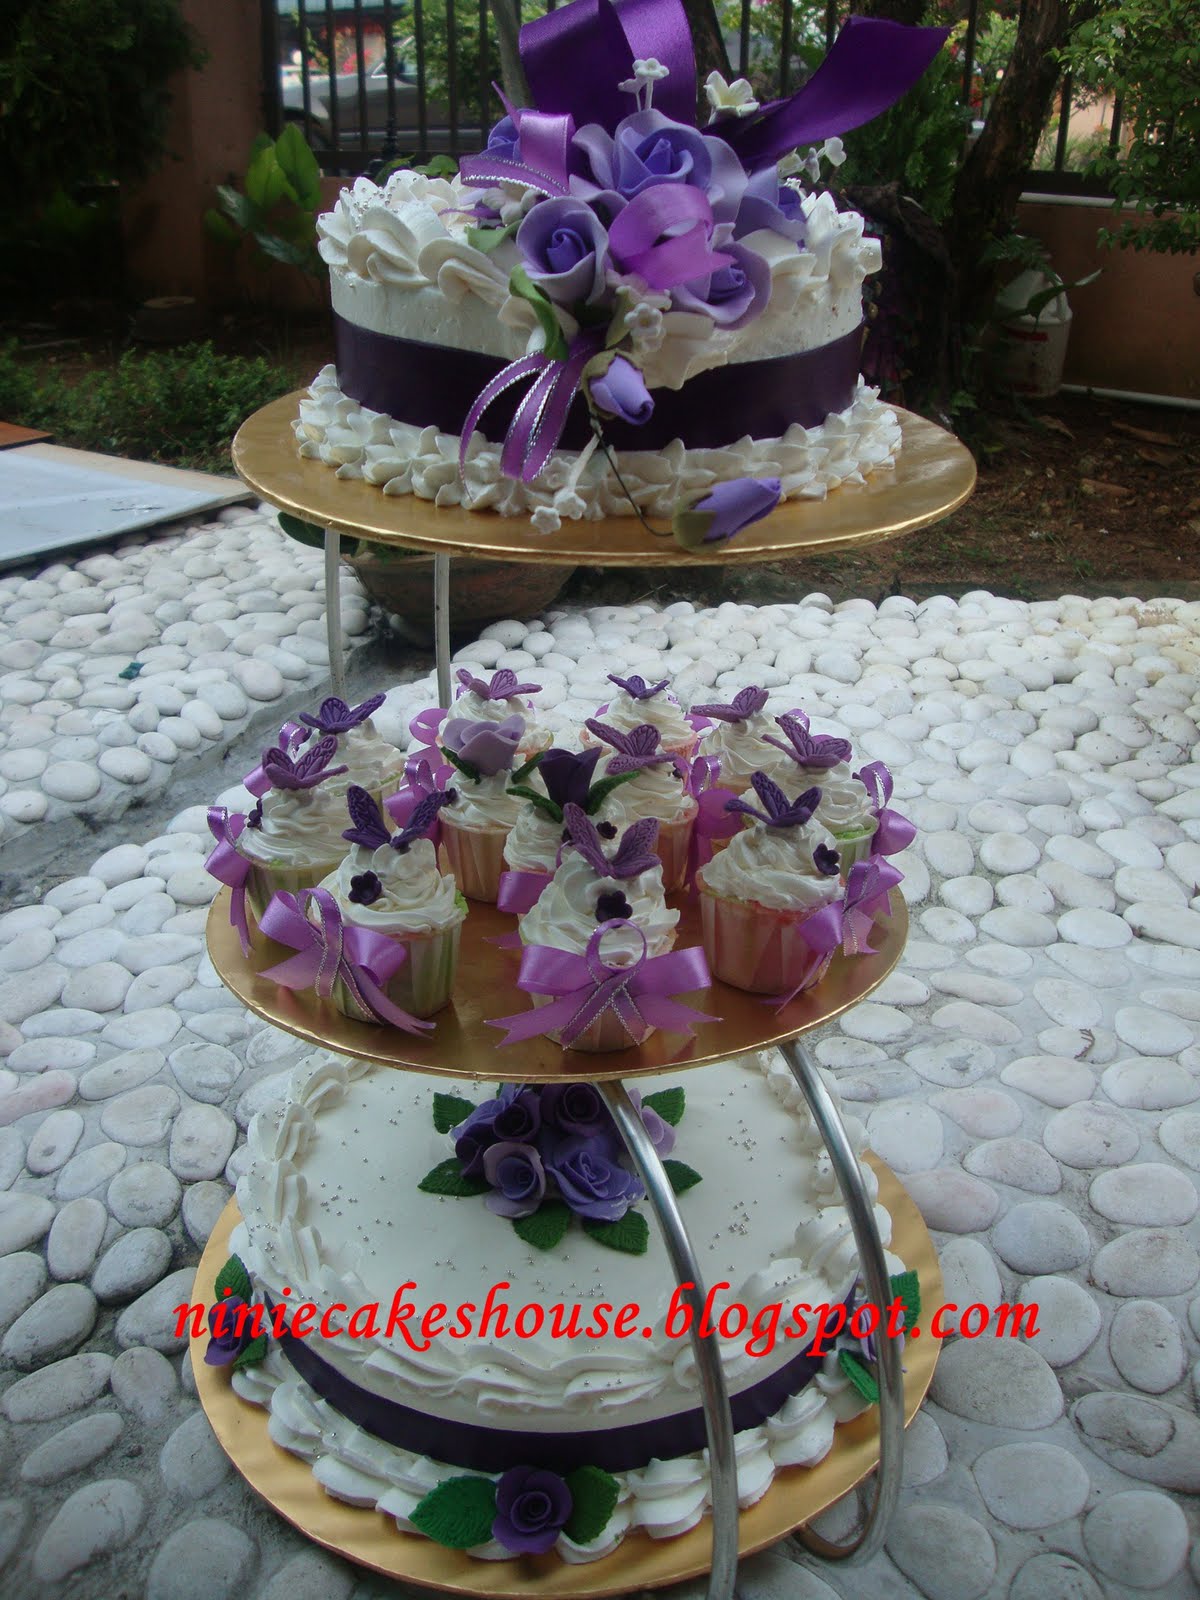 3 Tier Purple and White